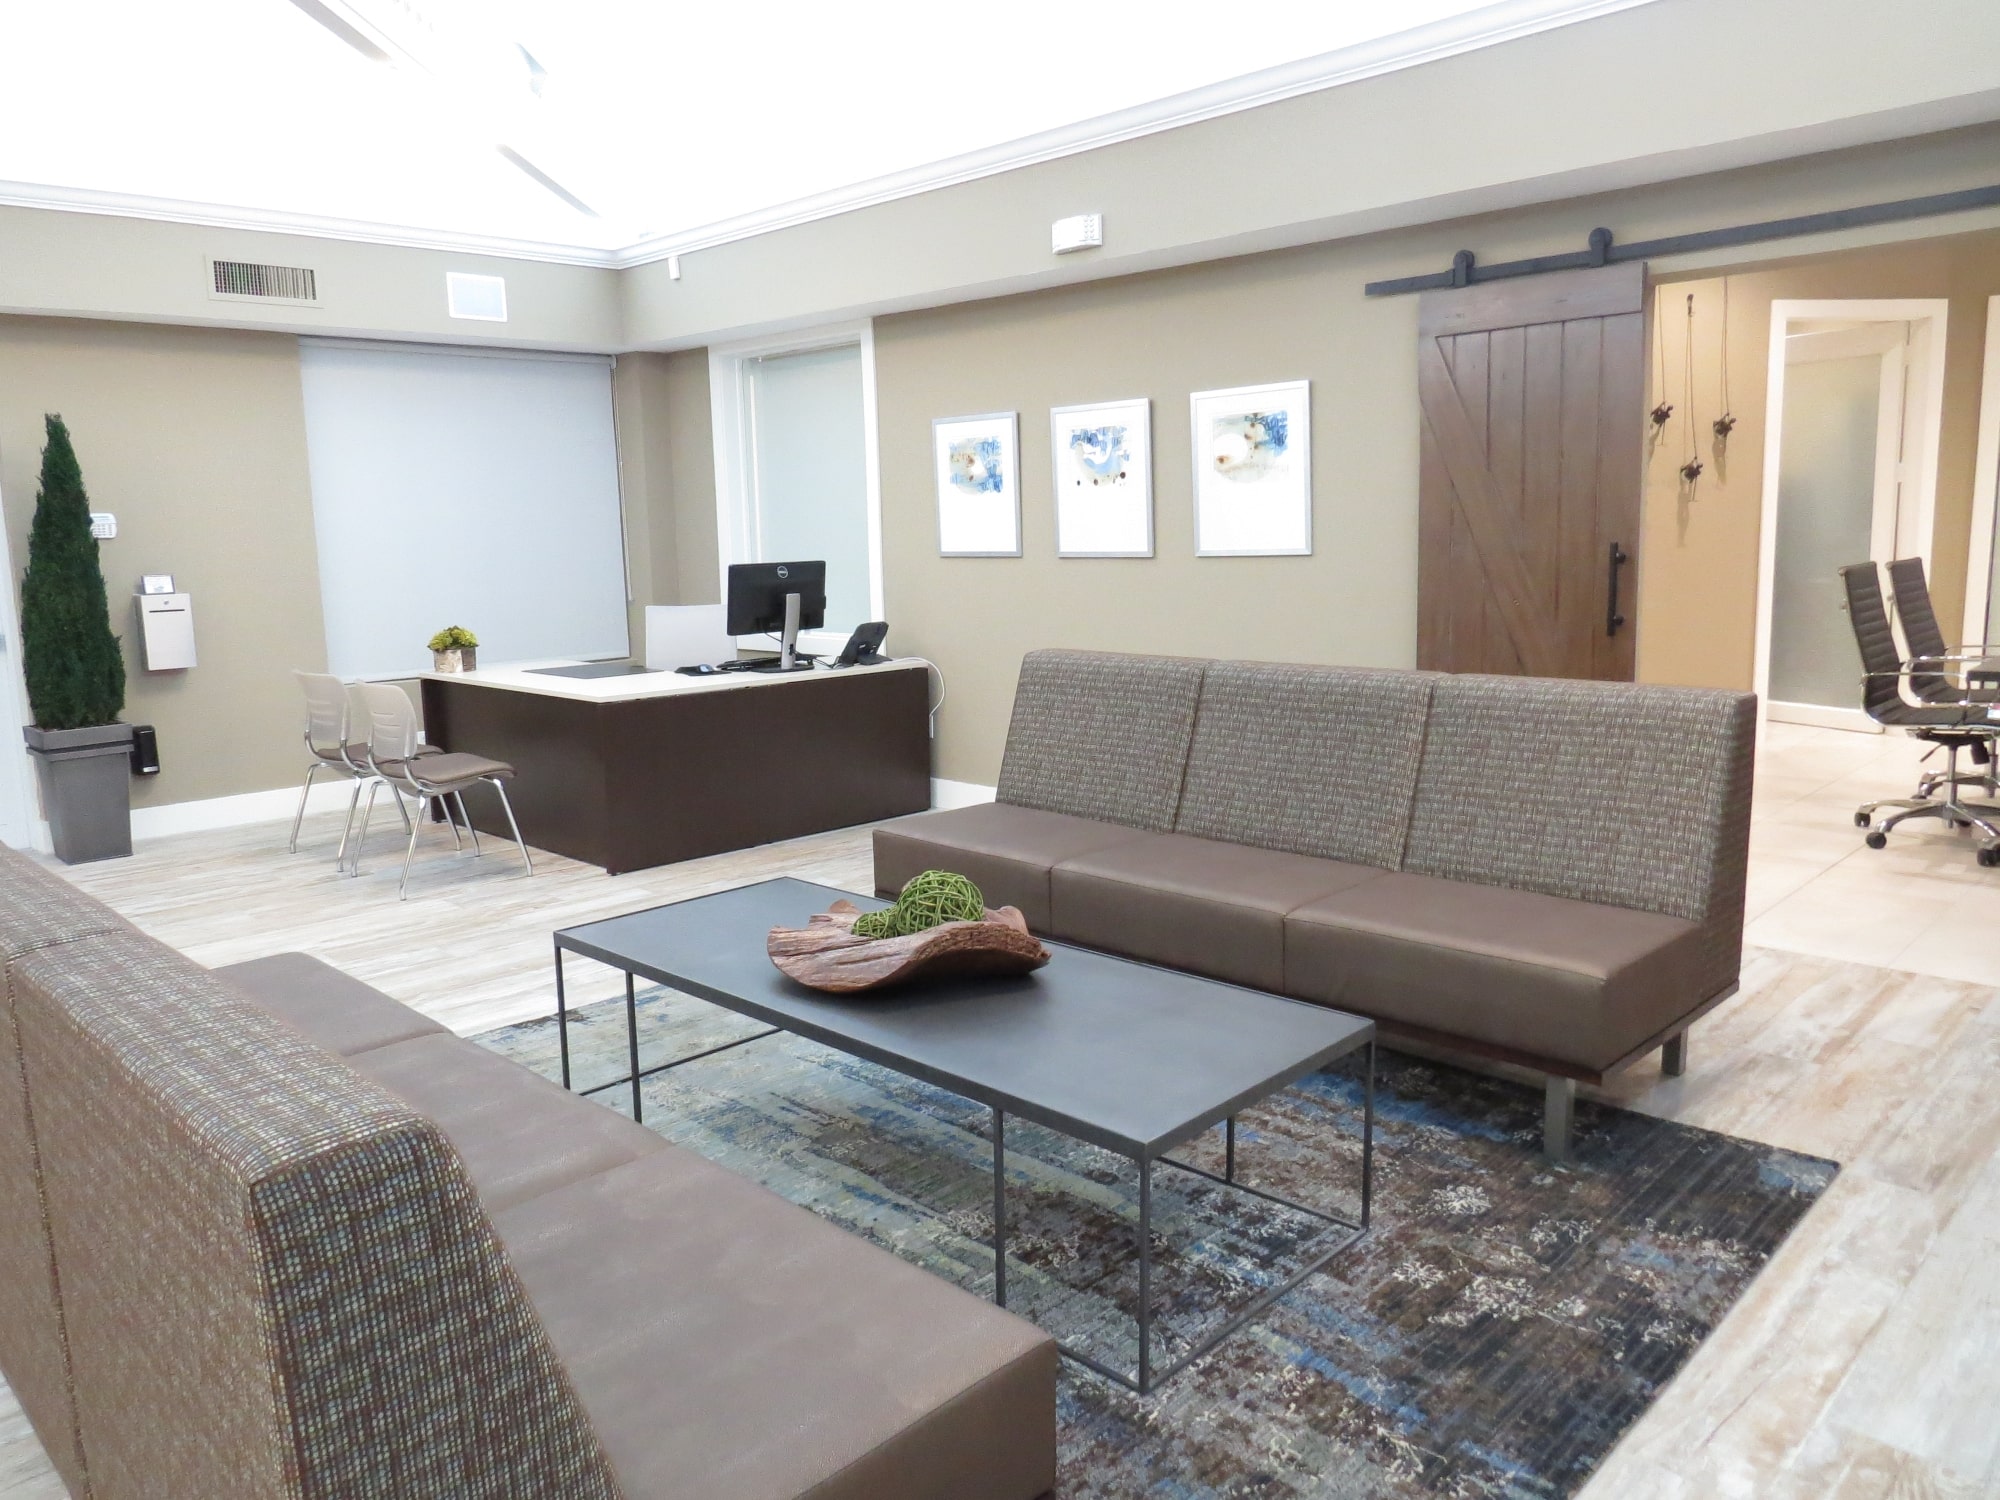 Seating area in leasing center.